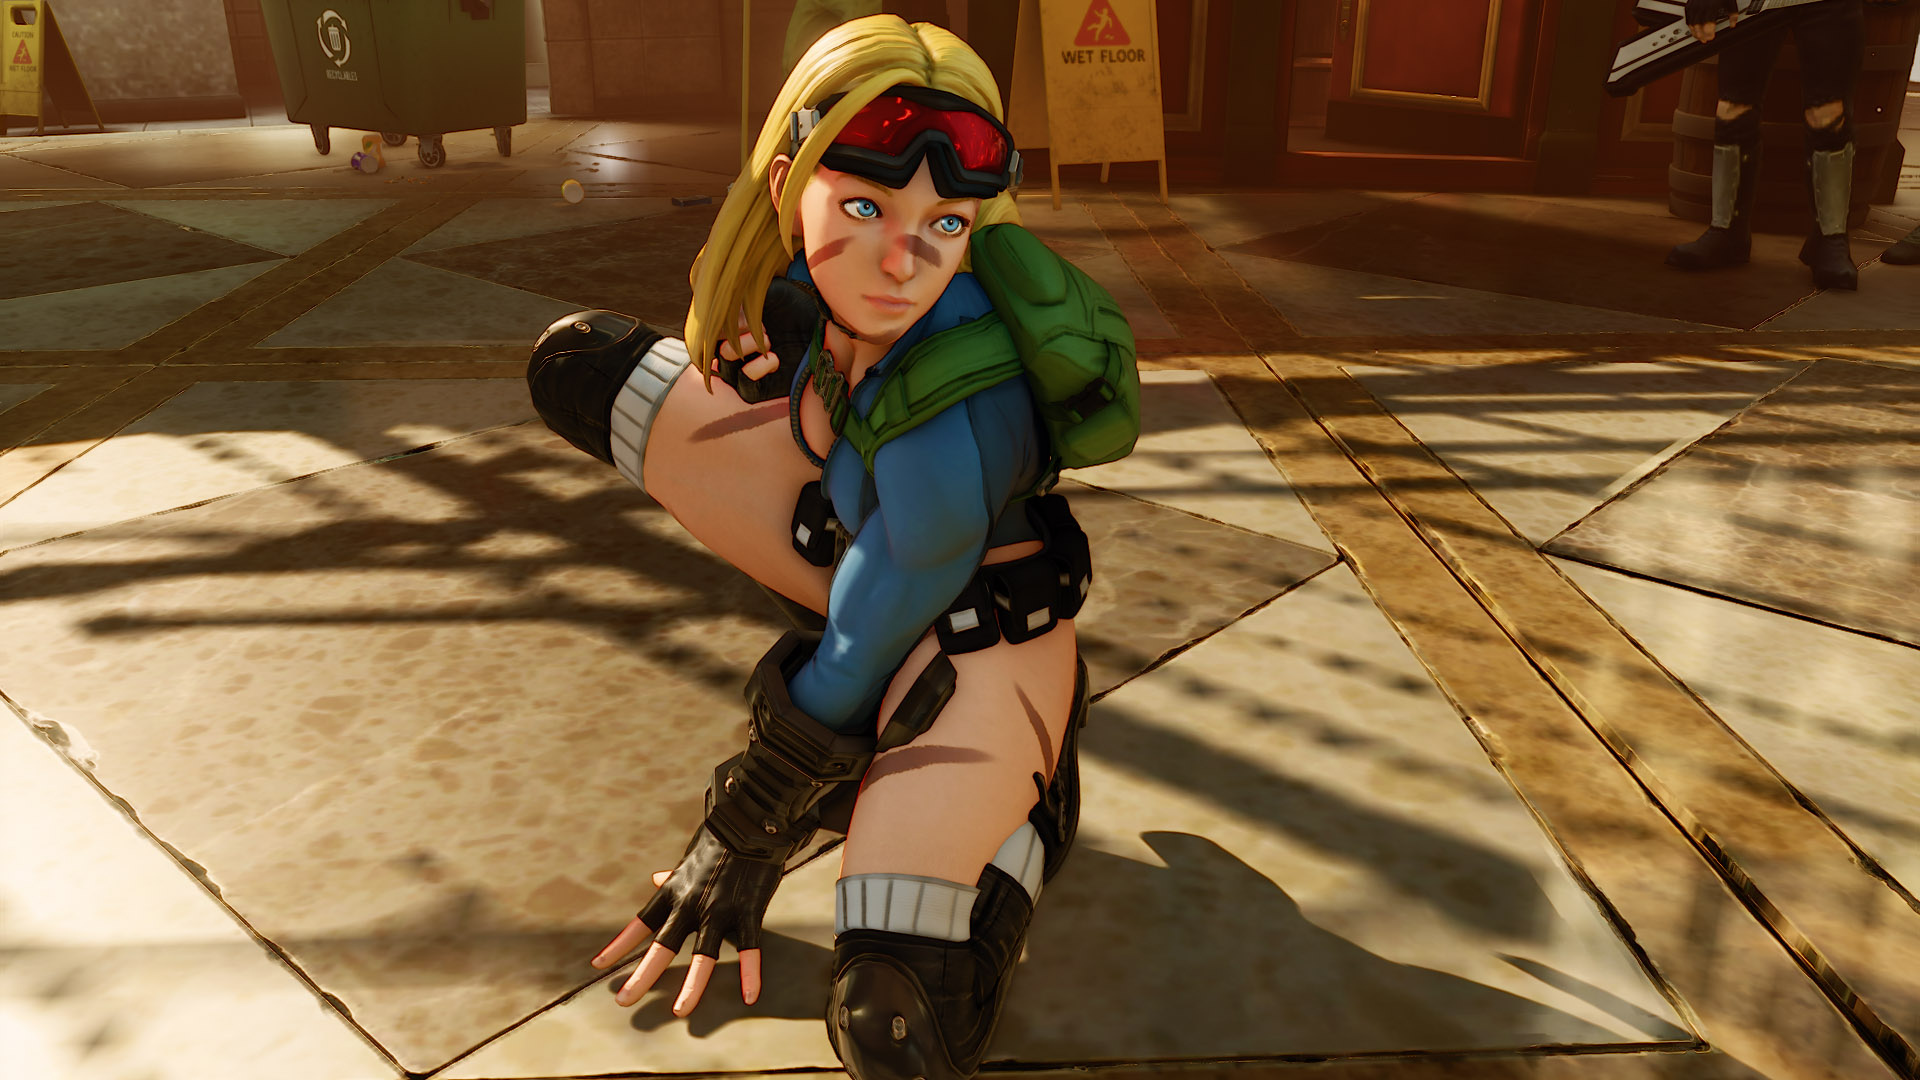 Gaming Journos: Cammy is TOO HOT and Street Fighter is TOO HARD.